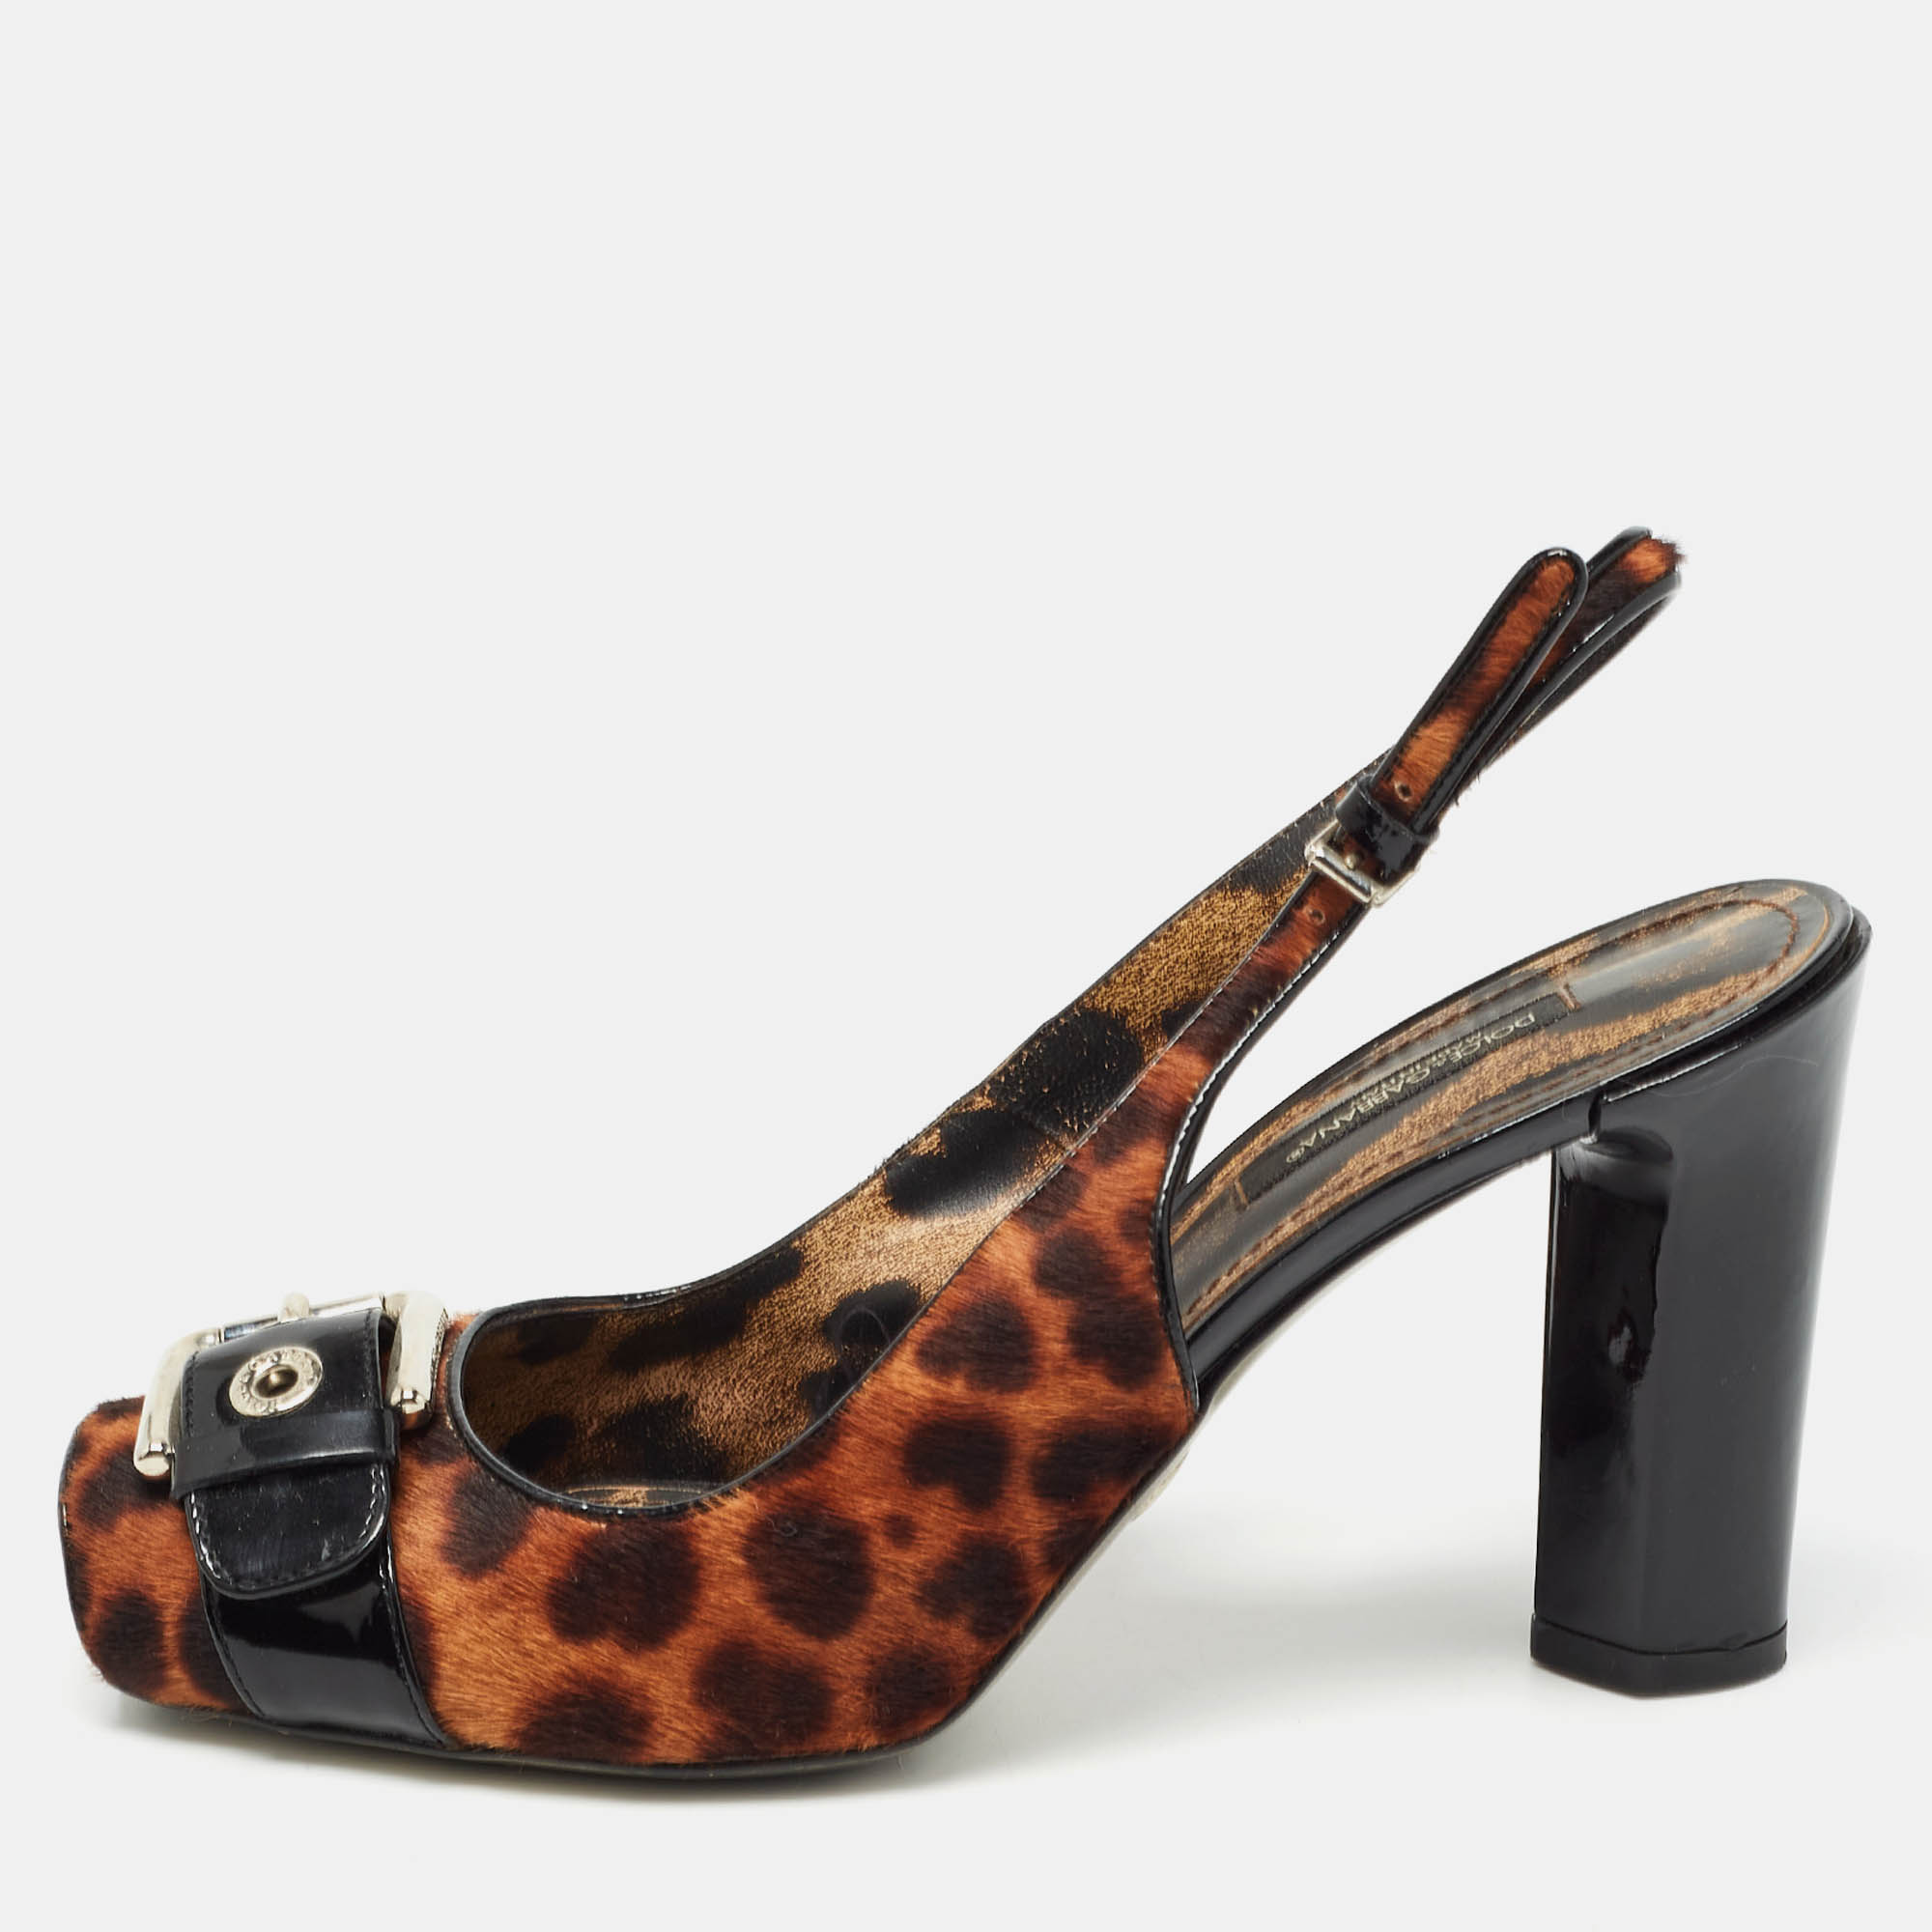 Dolce & gabbana brown/black leopard calf hair and patent open toe slingback pumps size 37